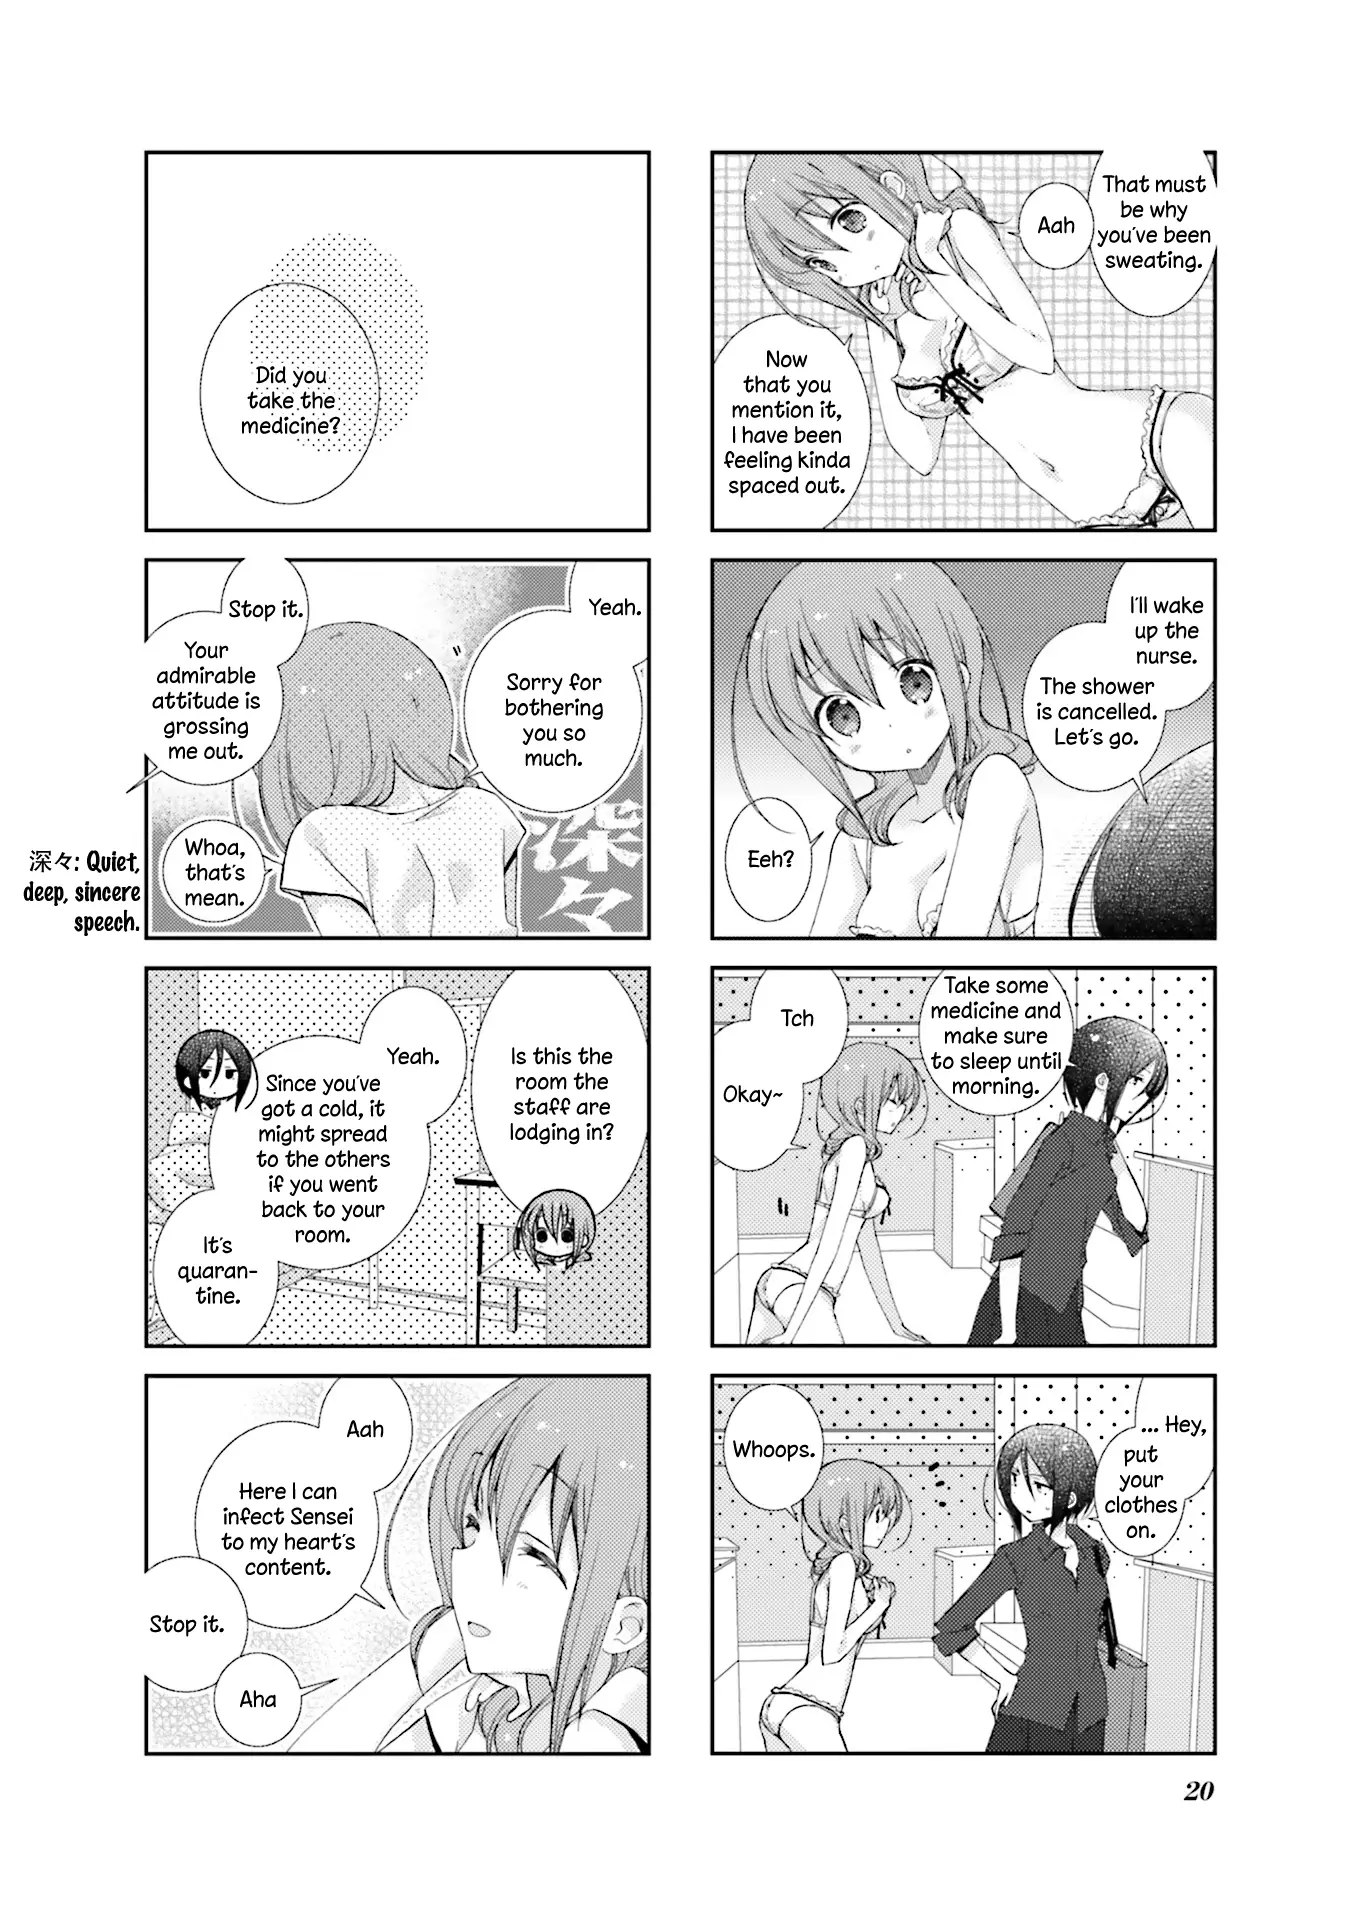 Slow Start - 39 page 6-6366adc8